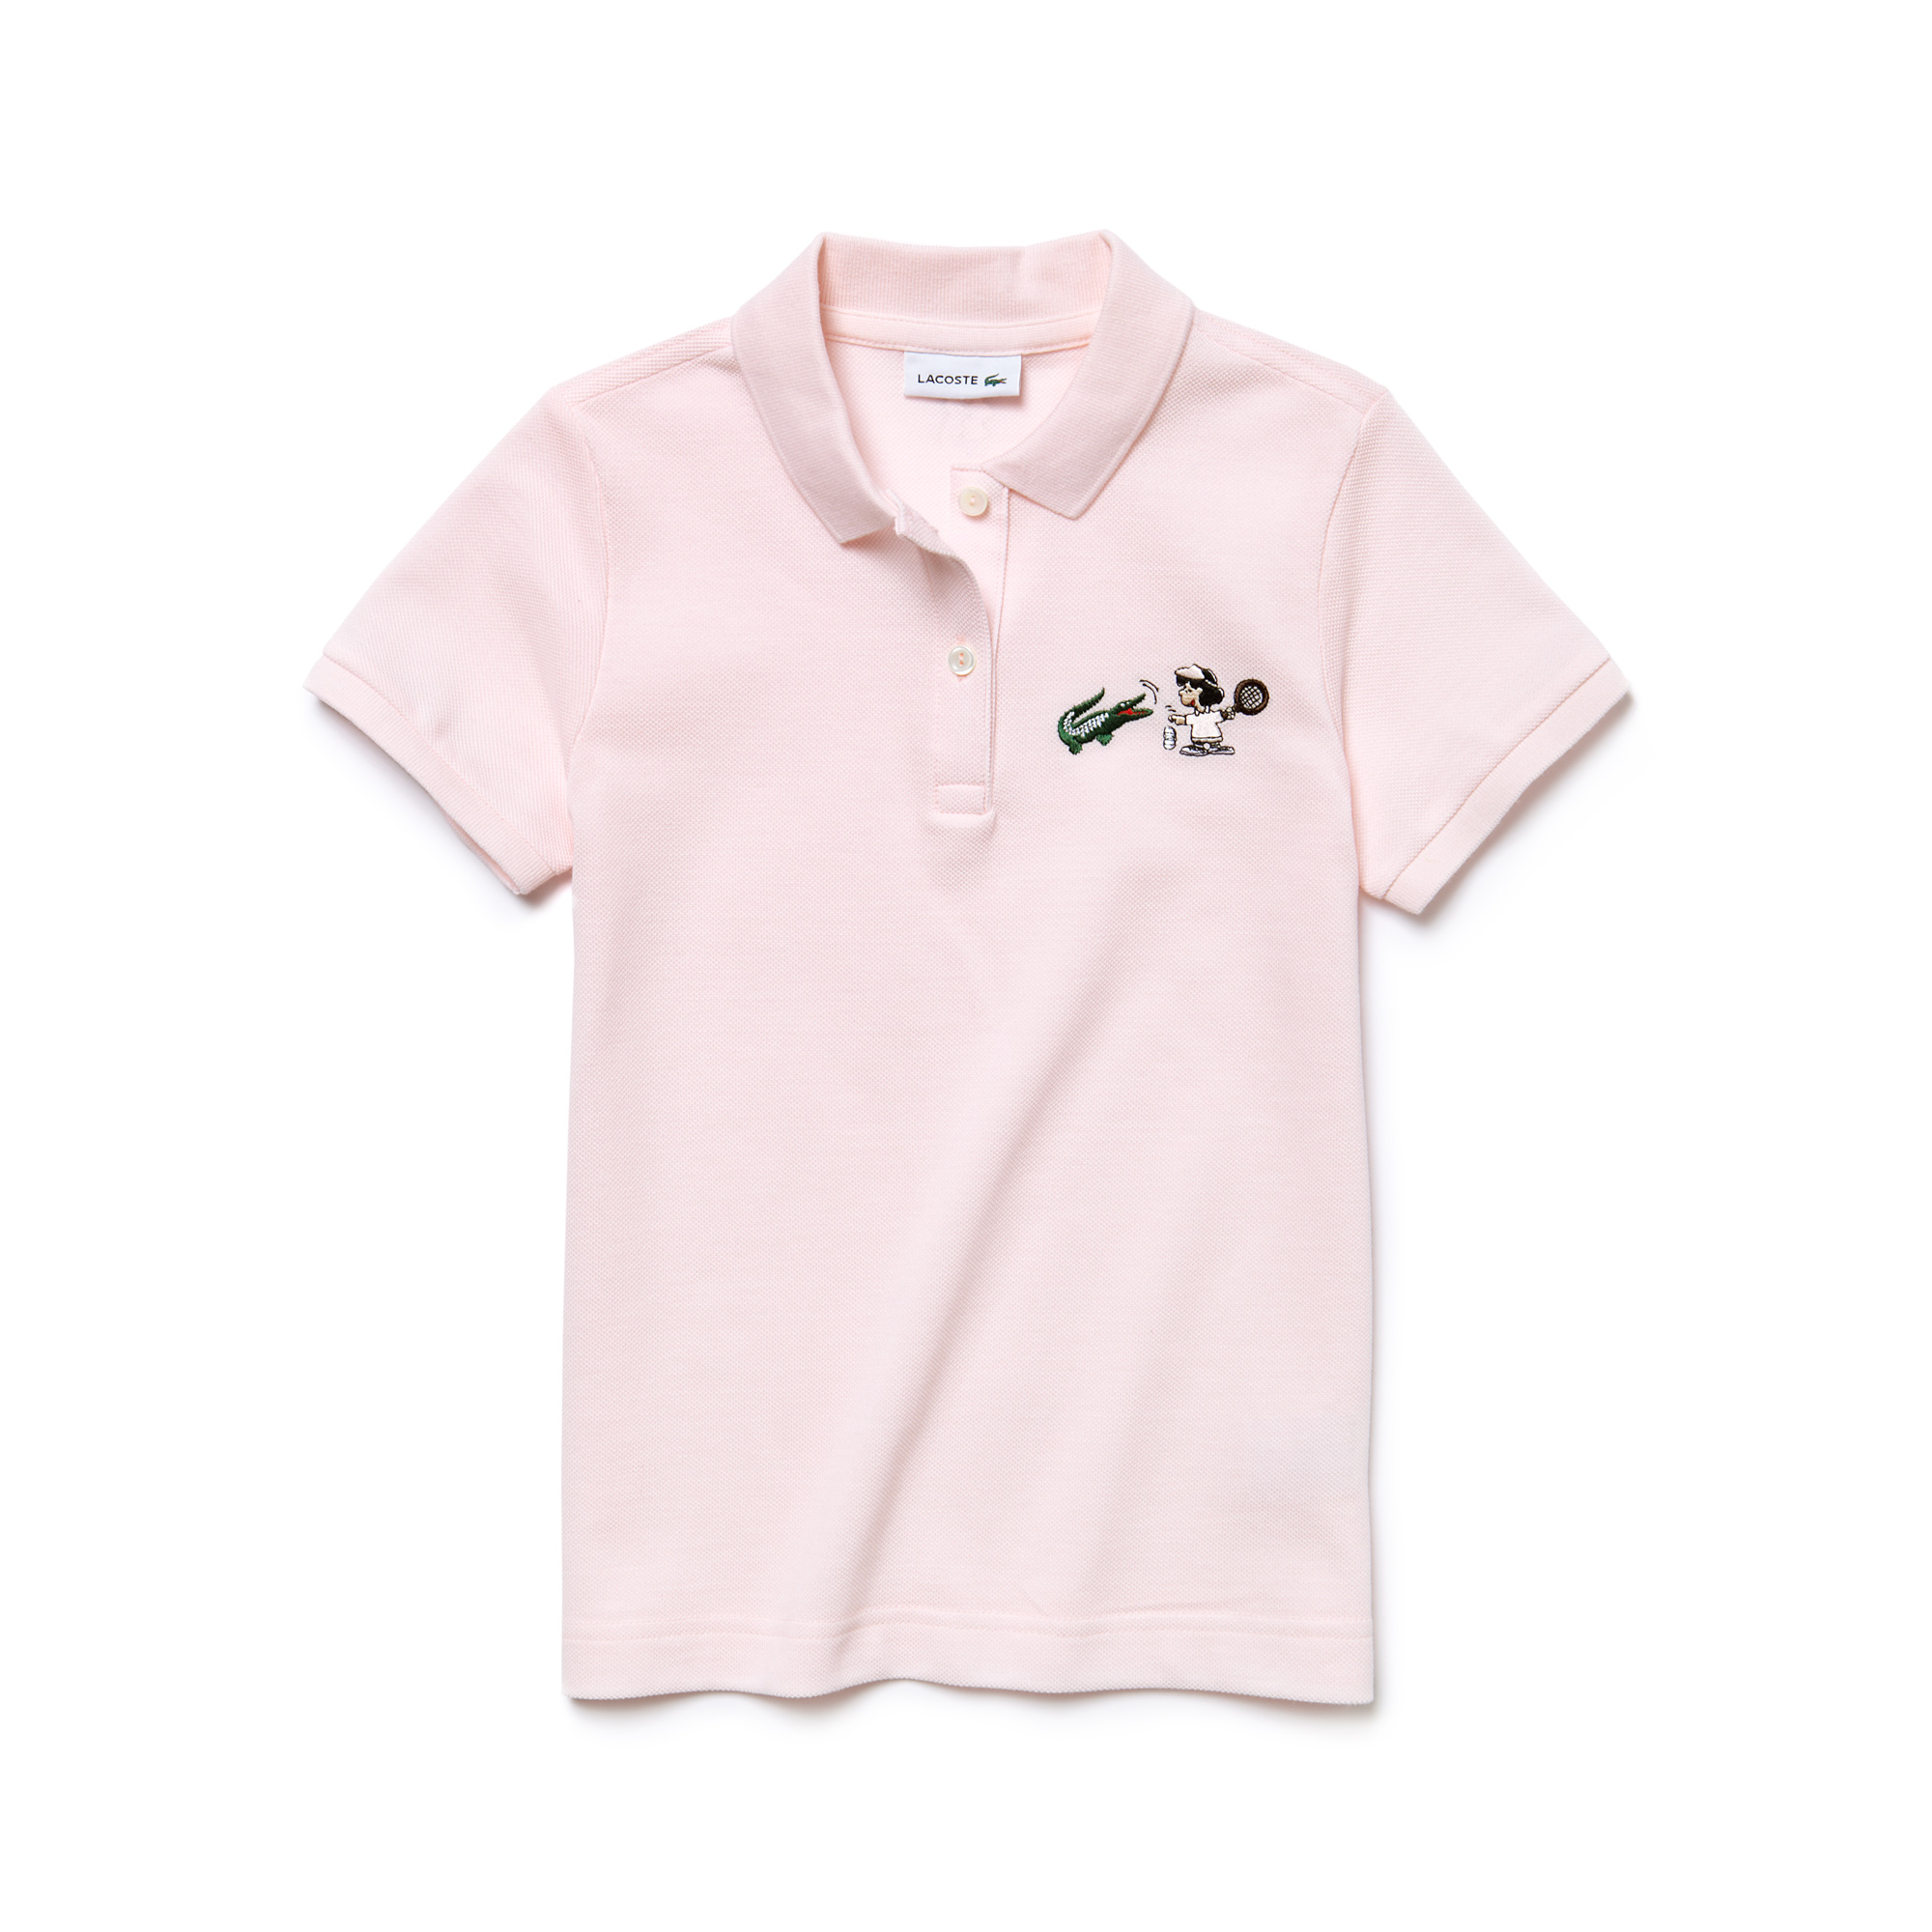 PEANUTS x LACOSTE Capsule Collection